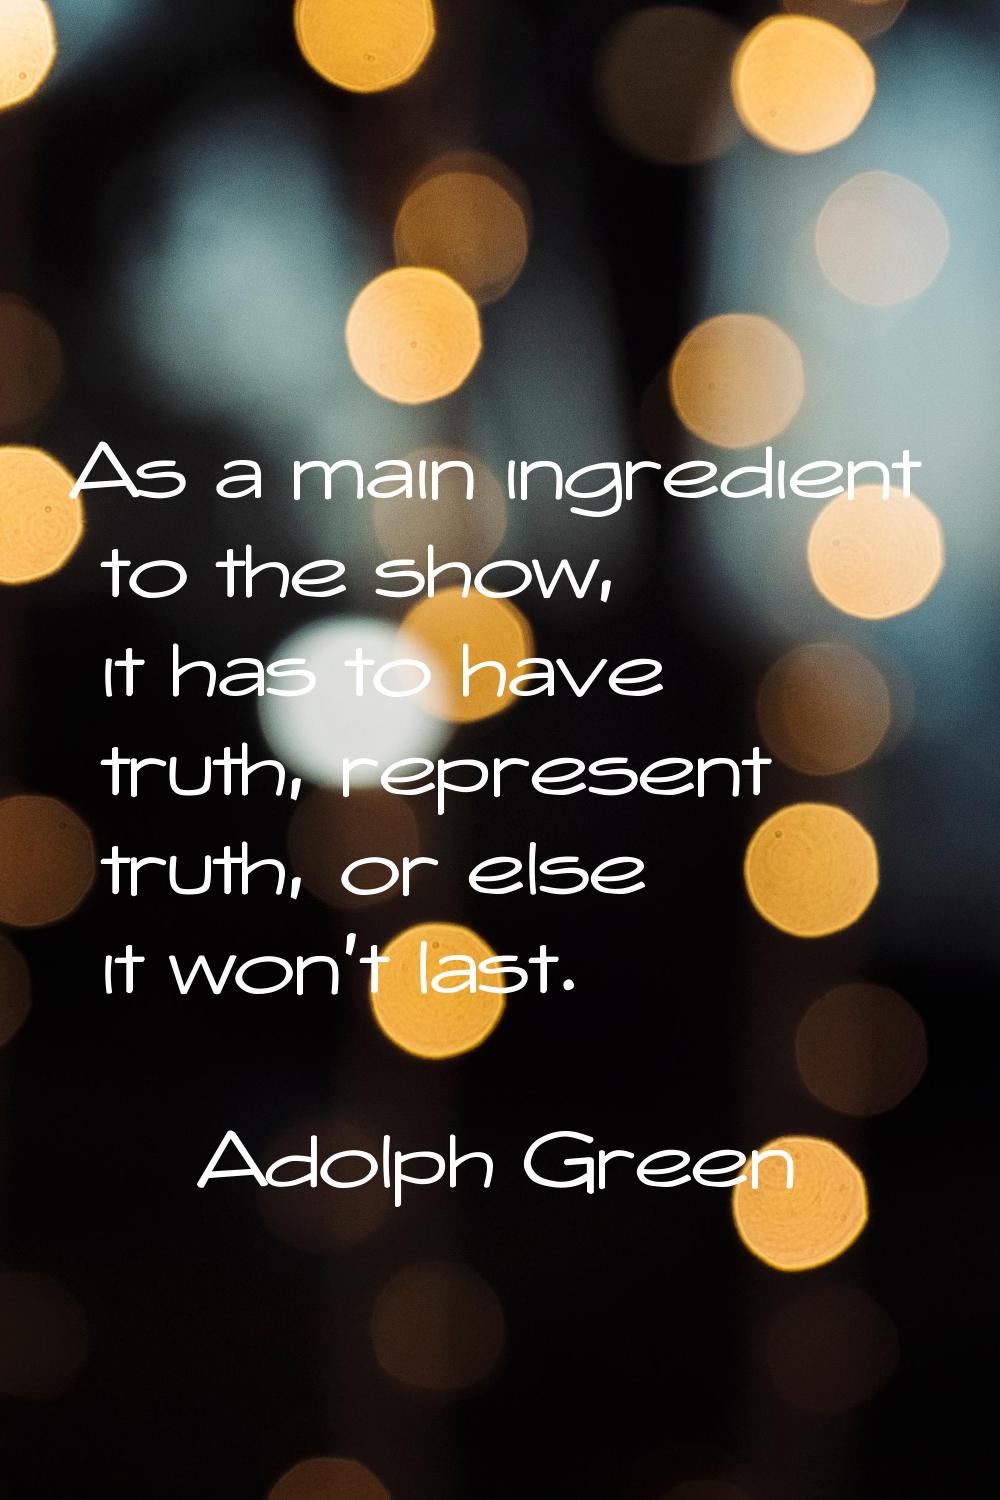 As a main ingredient to the show, it has to have truth, represent truth, or else it won't last.